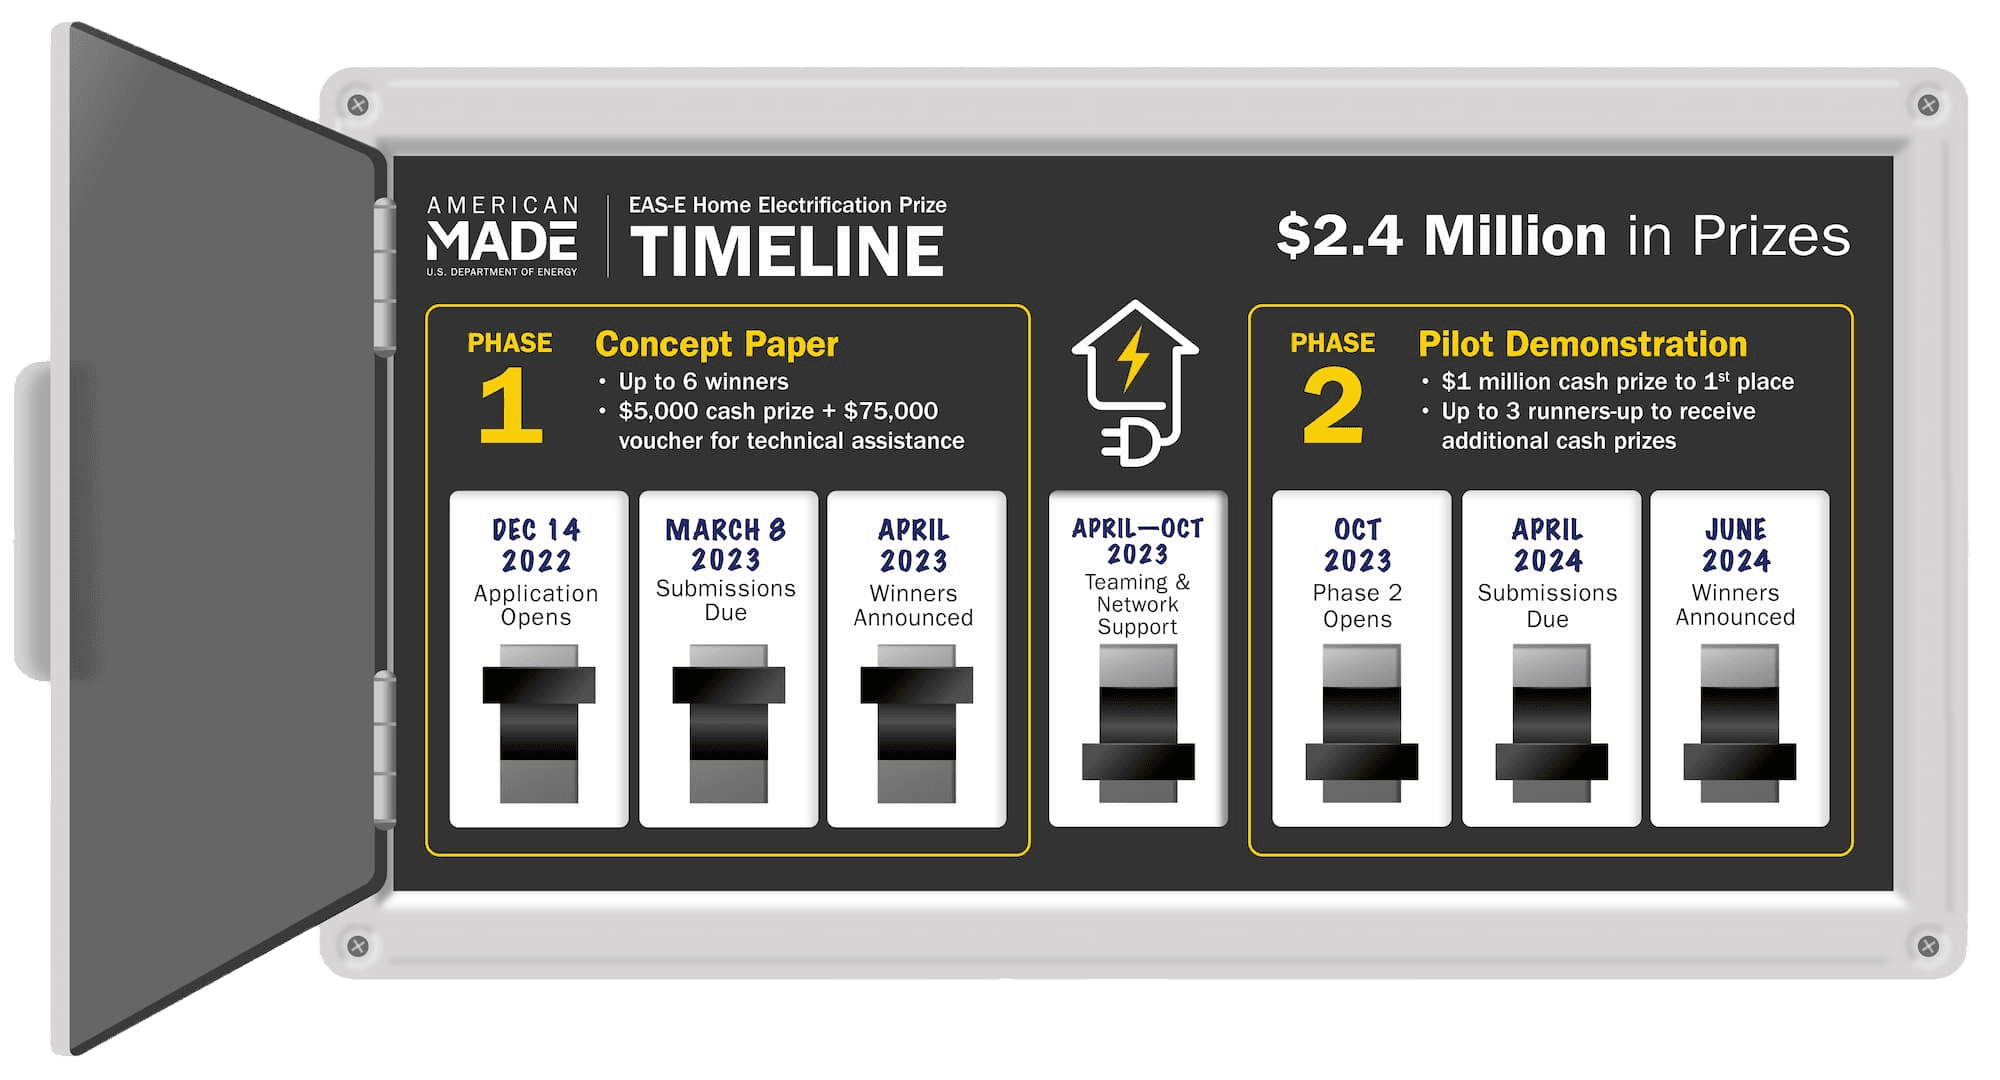 Graphic depicting a breaker panel showing a timeline of key dates for the EAS-E Prize. $2.4 million in prizes are available. For Phase 1—Concept Paper—there will be up to 5 winners, each receiving $5,000 in cash prizes and $75,000 in vouchers for technical assistance. Applications open December 2022. Submissions due February 2023. Winners announced March 2023. Between March and September 2023, teaming and network support with be available. For Phase 2—Pilot Demonstration—$1 million will be awarded to the 1st place winner with up to two runners-up receiving additional cash prizes. Phase 2 opens September 2023. Submissions due March 2024. Winners announced May 2024.